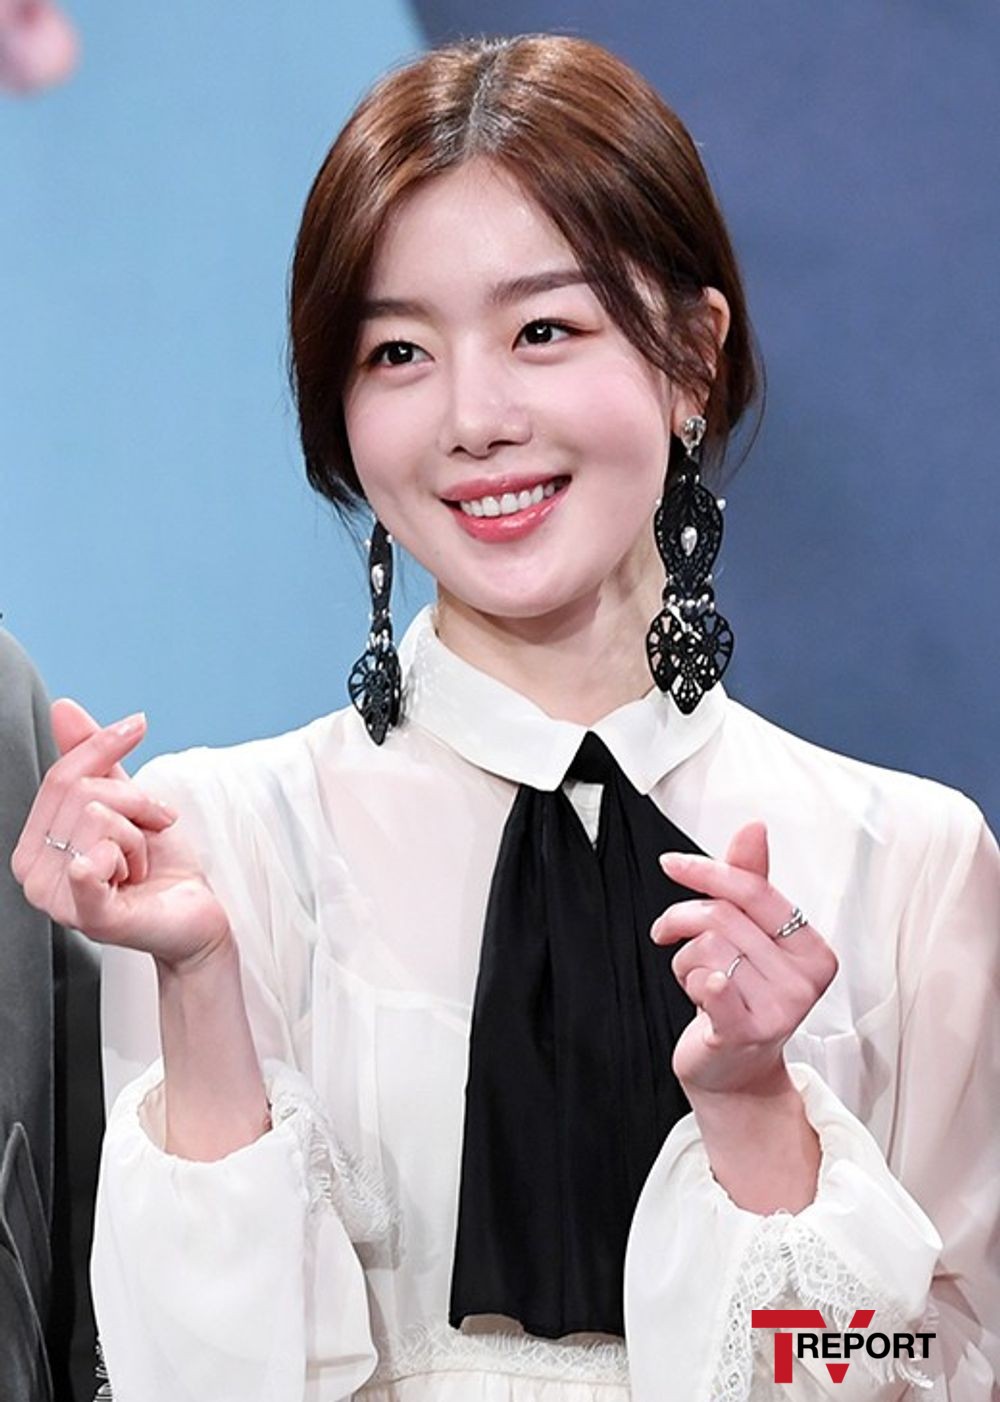 On Thursday Keyeast Entertainment announced news of the Exclusive contract with Han Sun-hwa.Hong Min-ki, vice president of Keyeast Entertainment Management, said, Han Sun-hwa has been working as an actor in acting sincerely after turning from singer to actor in 2014.We will actively support Han Sun-hwa to spread a wide spectrum of smoke with his colorful charm.Han Sun-hwa, who made his debut as a member of the girl group The Secret in 2009, was loved by many hits such as Magic, Madonna, Love is Move, and Starlight Moonlight.In addition, I have enjoyed various entertainment programs with pleasant and hairy charm.Meanwhile, Keyeast Entertainment, which Han Sun-hwa signed an exclusive contract, belongs to a number of actors such as Son Hyun-joo Ju Ji-hoon Jung Ryeo-won Kim Dong-wook.He is also active in producing drama.